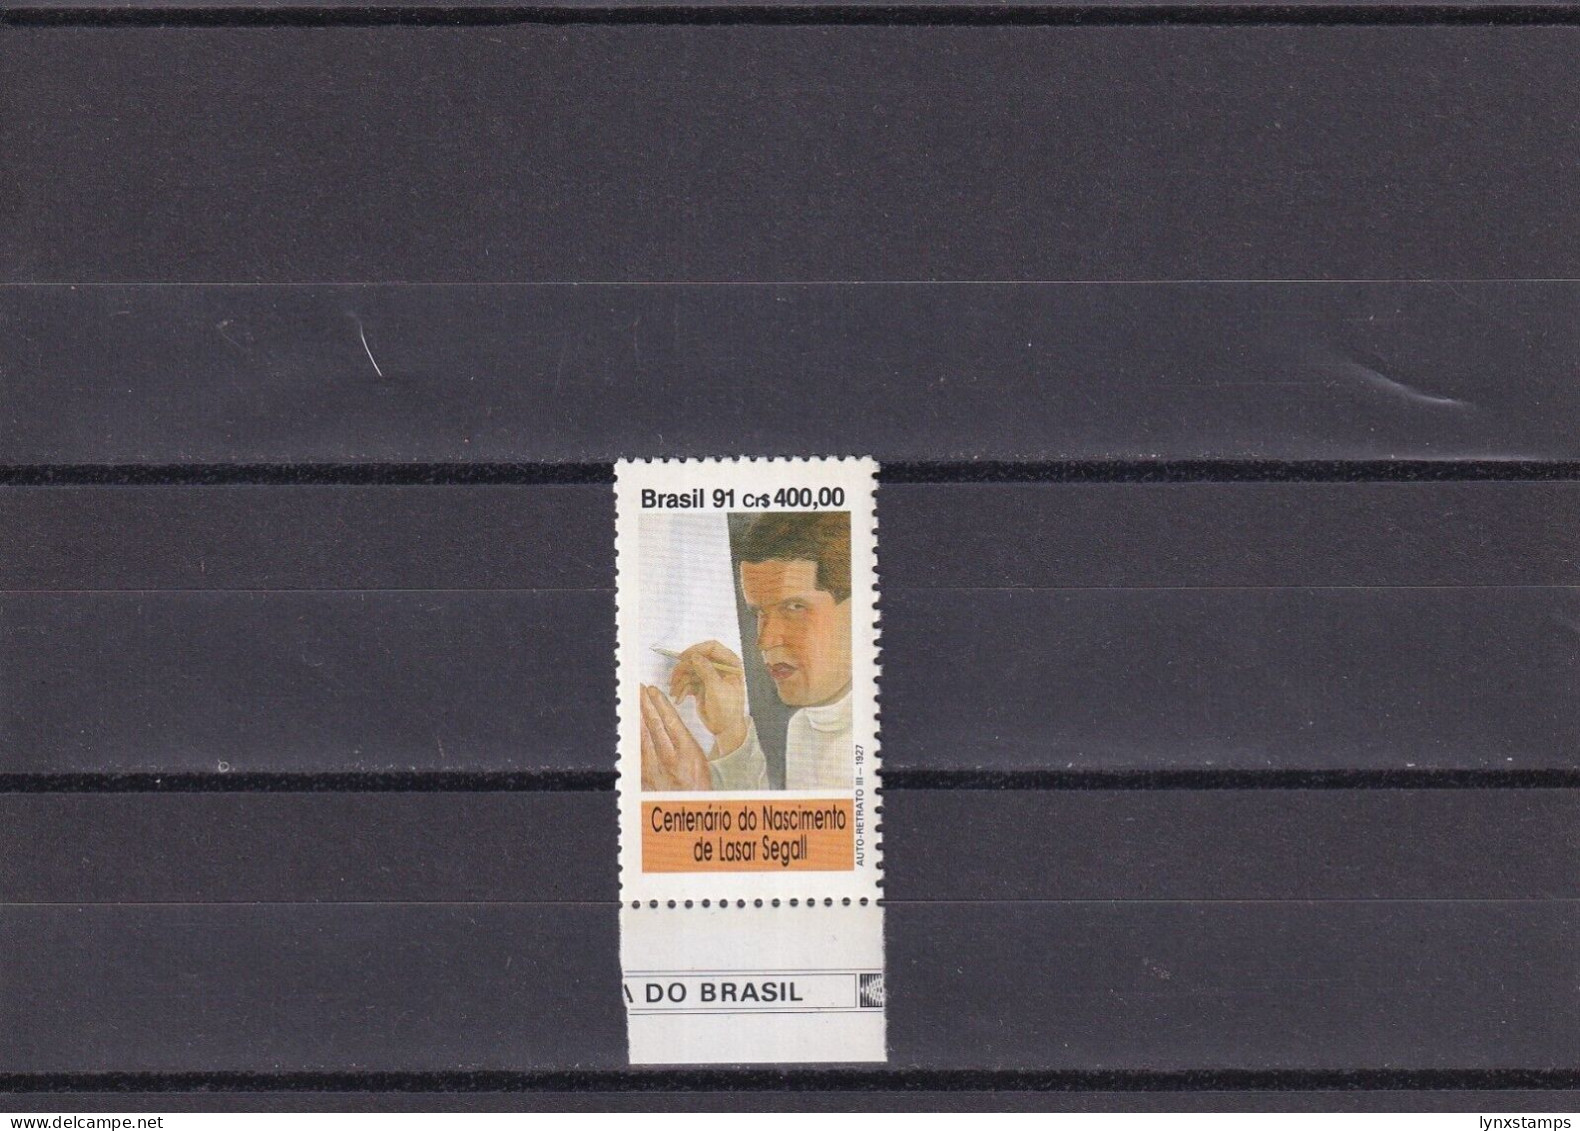 SA06 Brazil 1991 The 100th Anniversary Of The Birth Of Lasar Segall Mint Stamp - Unused Stamps